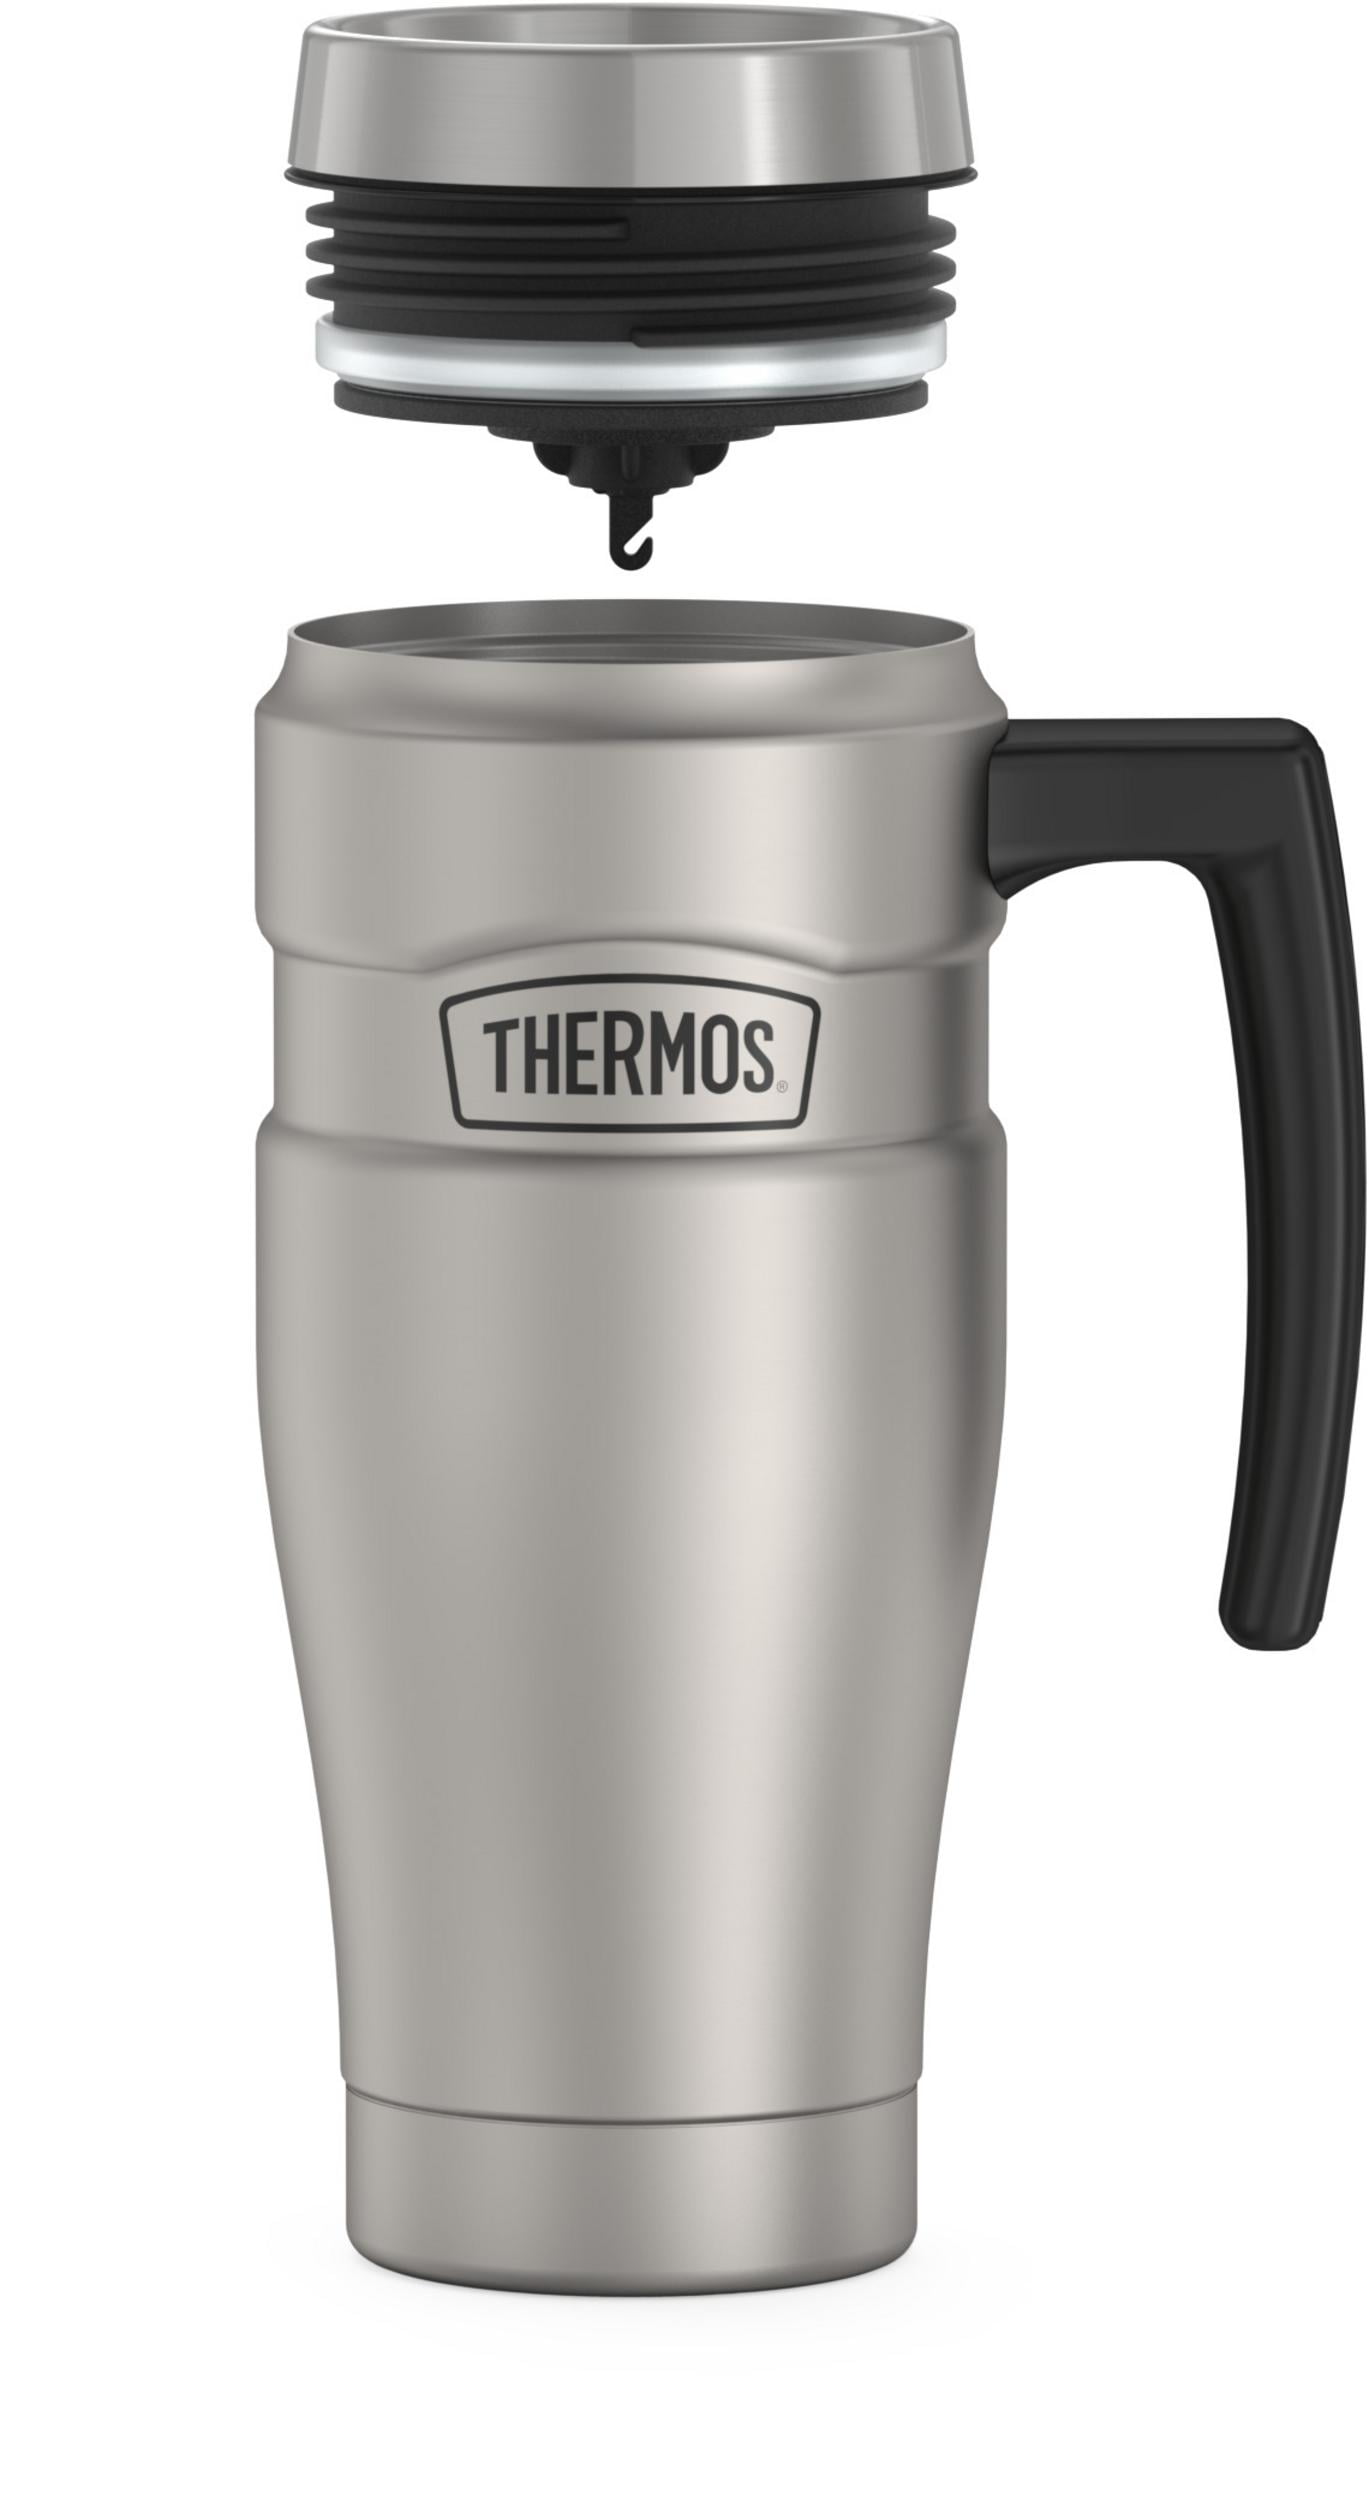  THERMOS Stainless King Vacuum-Insulated Travel Mug, 16 Ounce,  Midnight Blue : Home & Kitchen